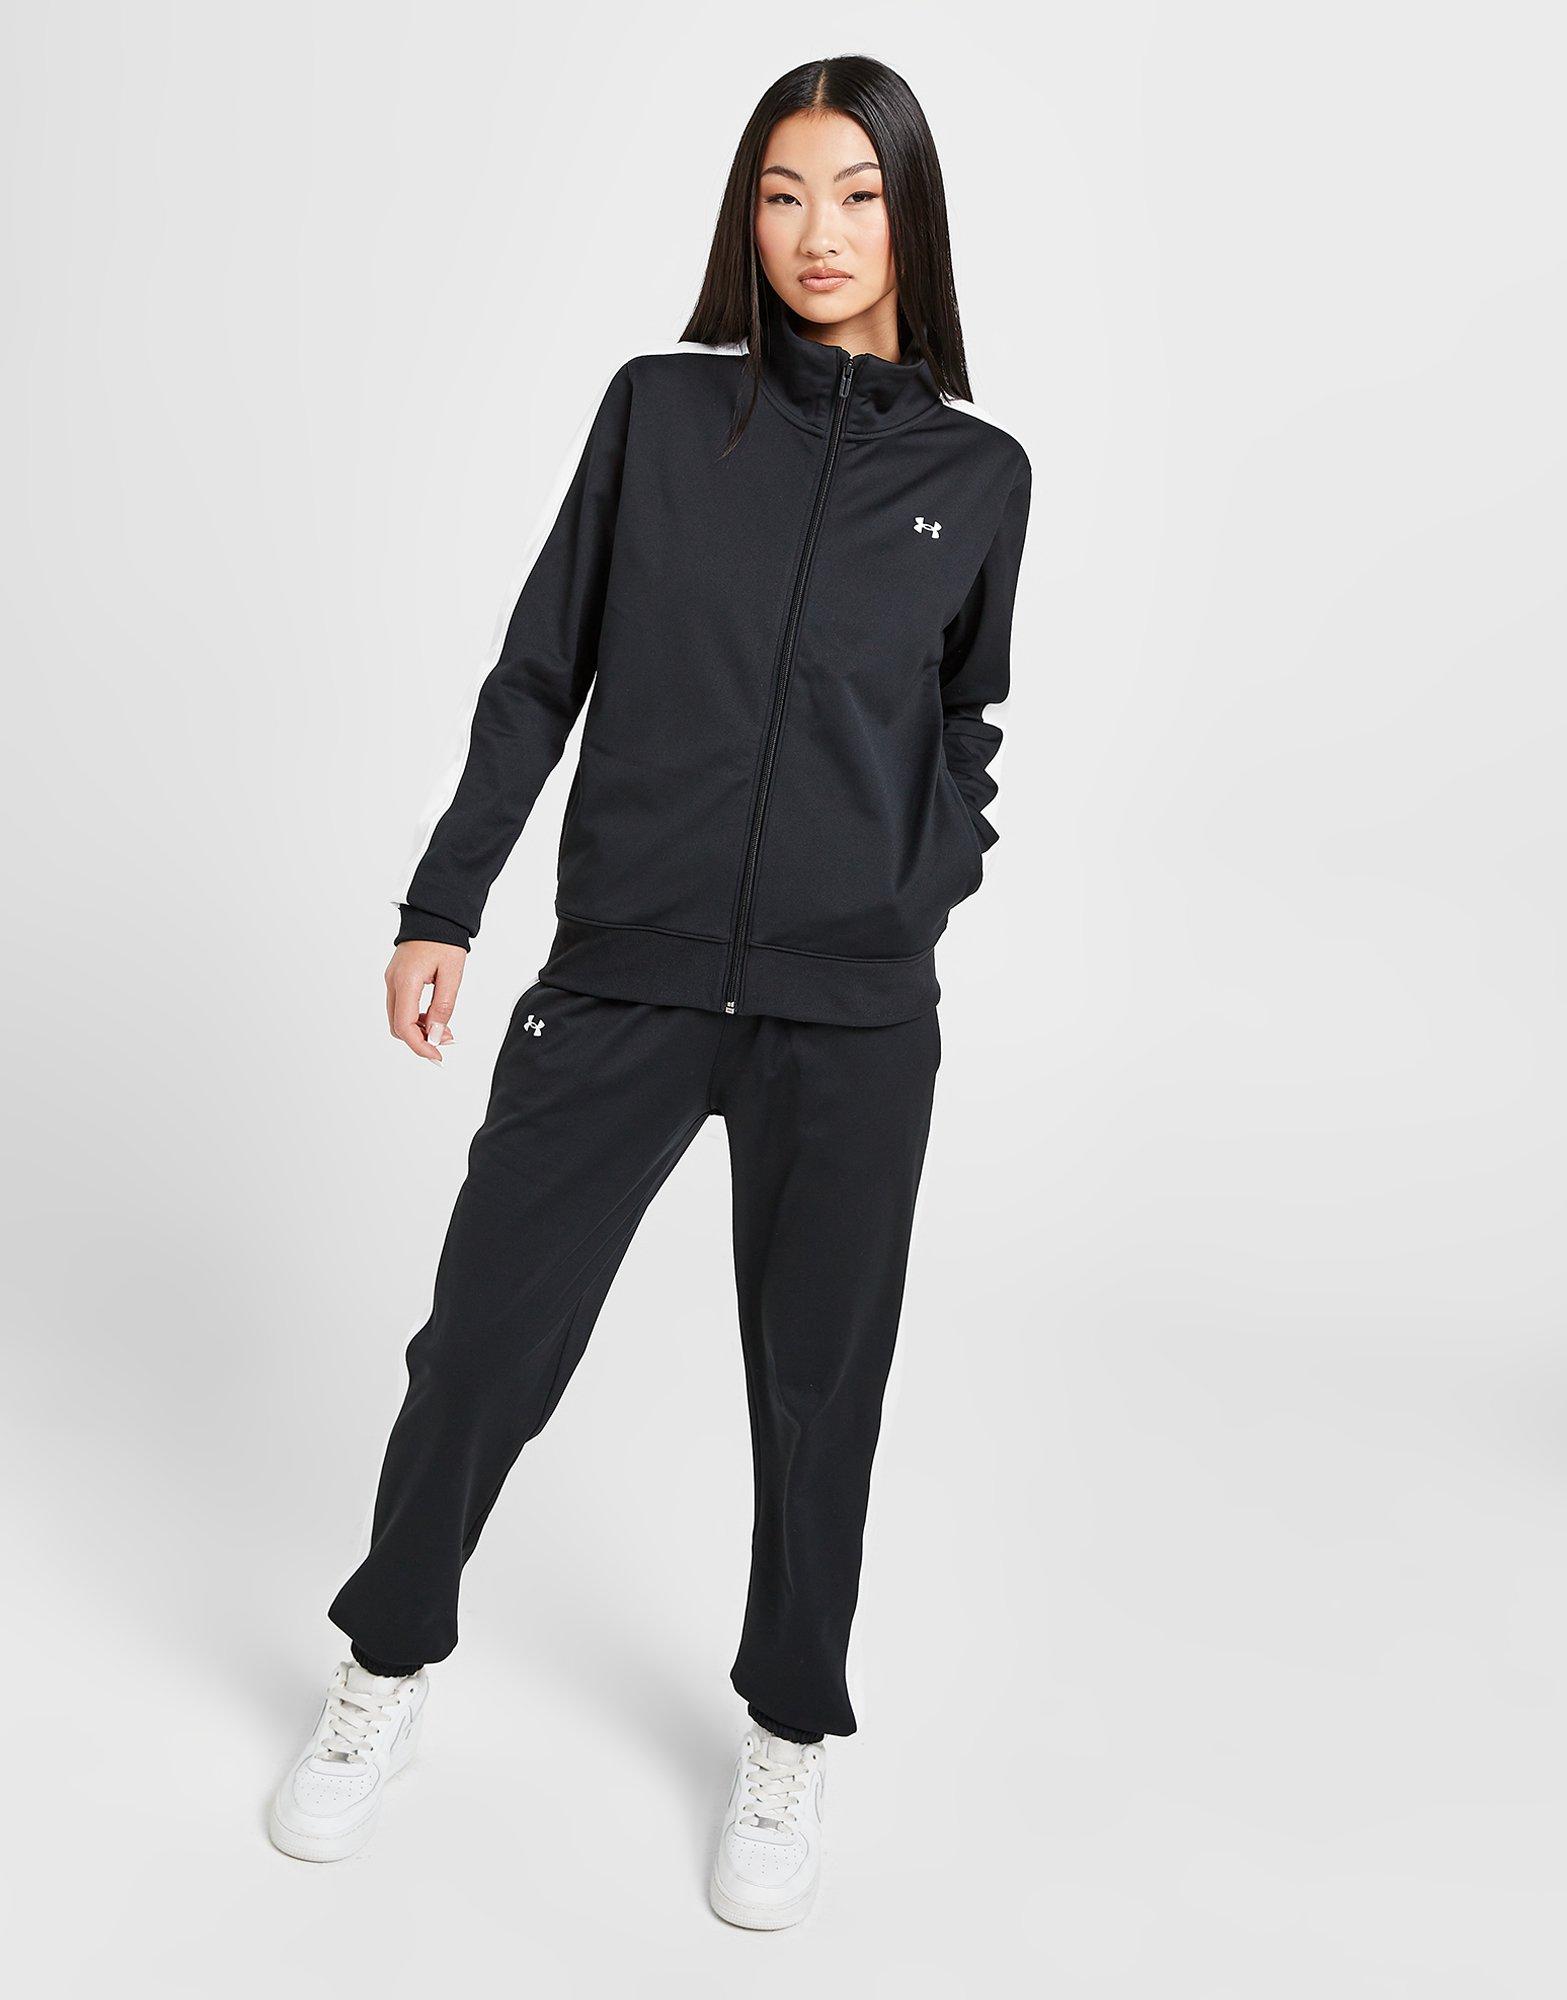 Buy Under Armour Tricot Tracksuit Women Pink online